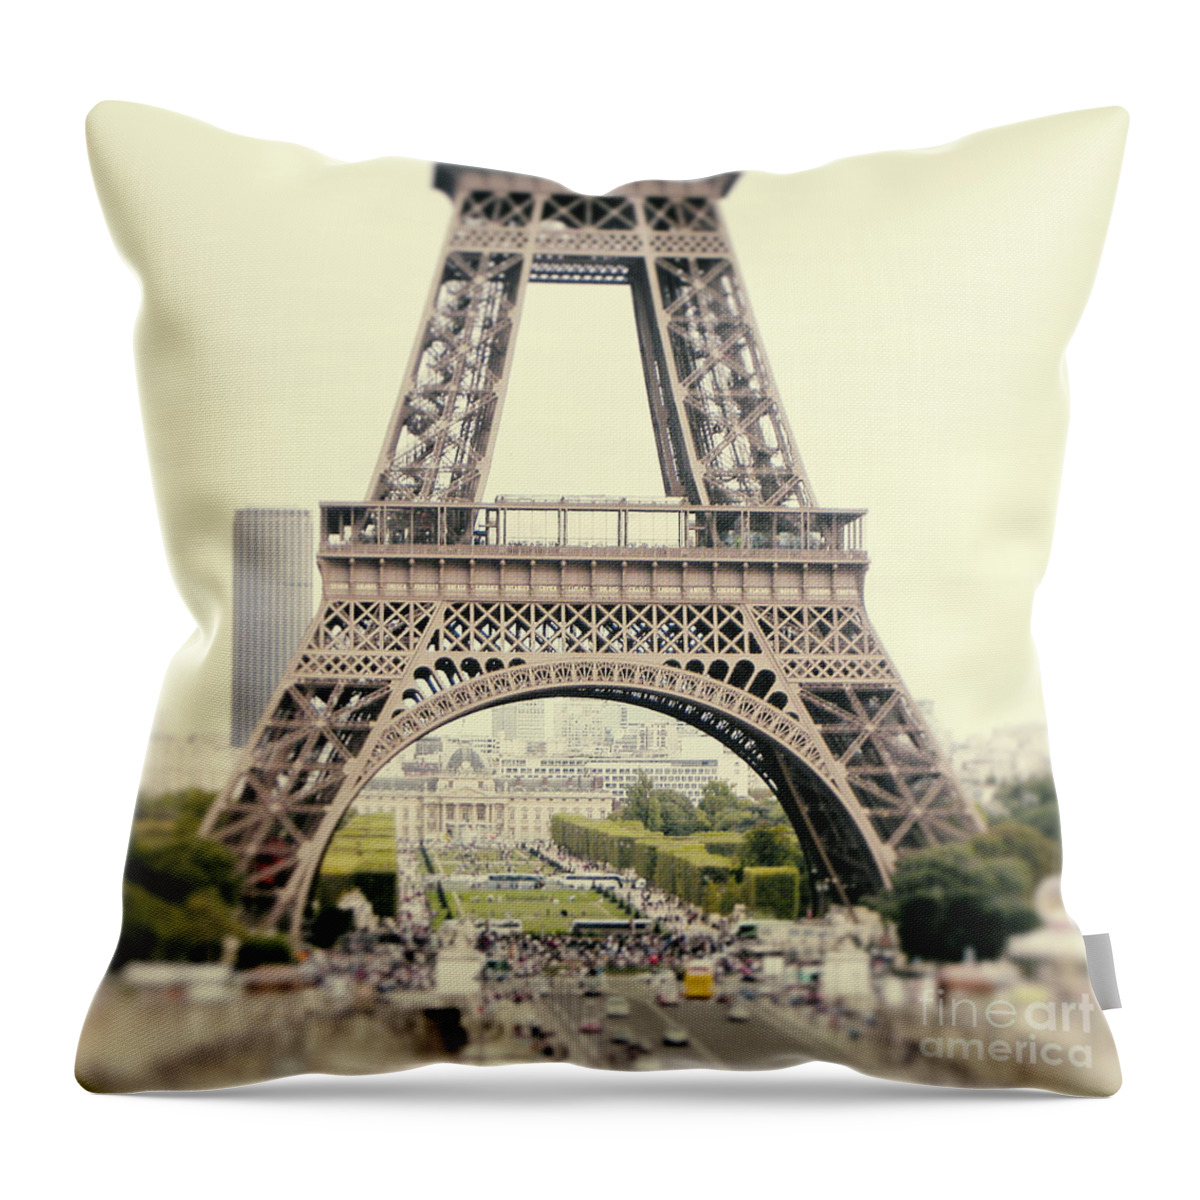 Photography Throw Pillow featuring the photograph Eiffel Tower by Ivy Ho